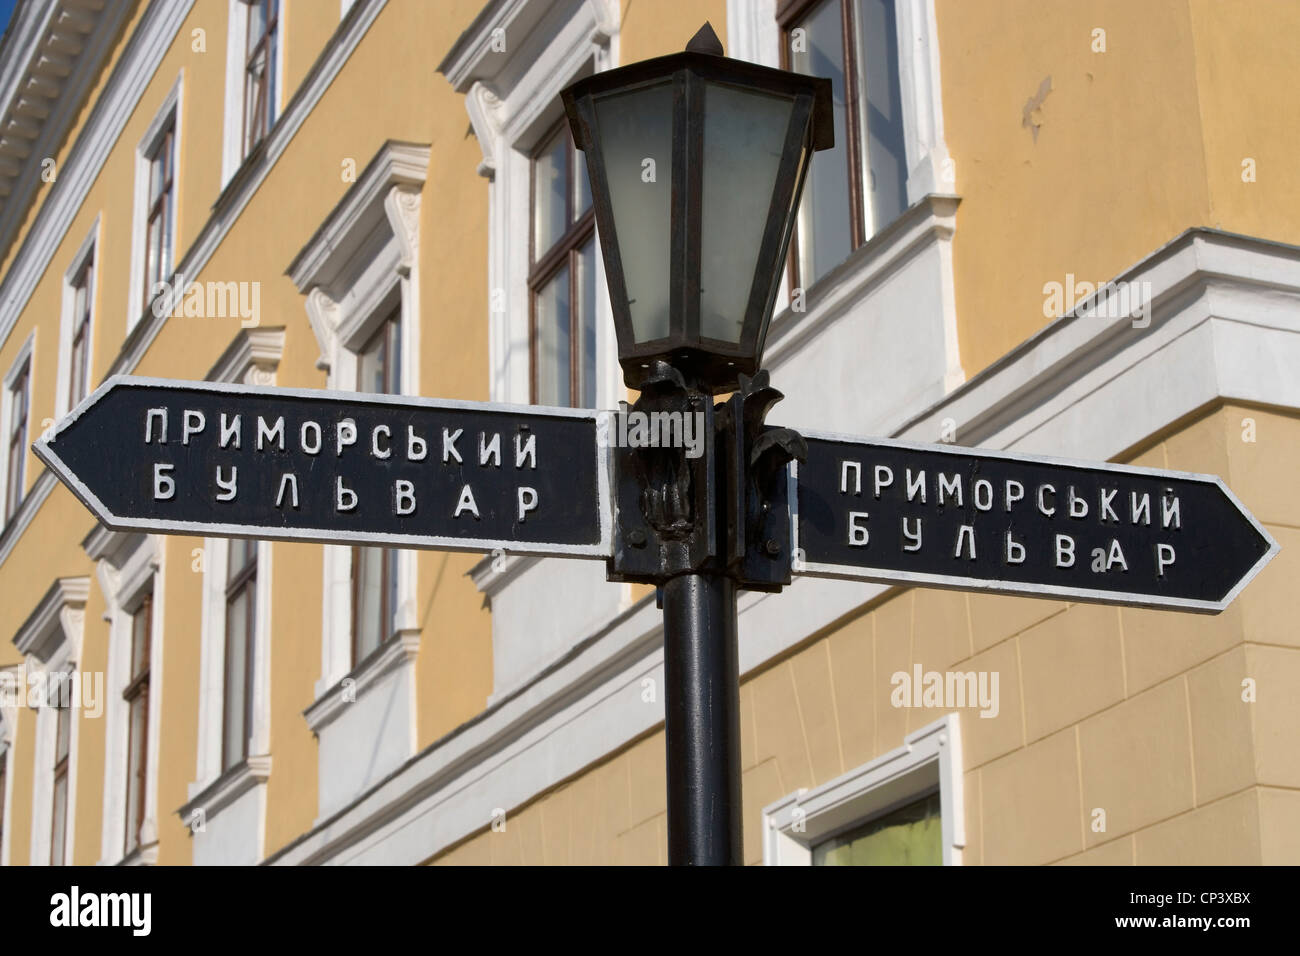 Ukraine - Odessa. Indication signs written in Cyrillic with Primorsky Boulevard Stock Photo